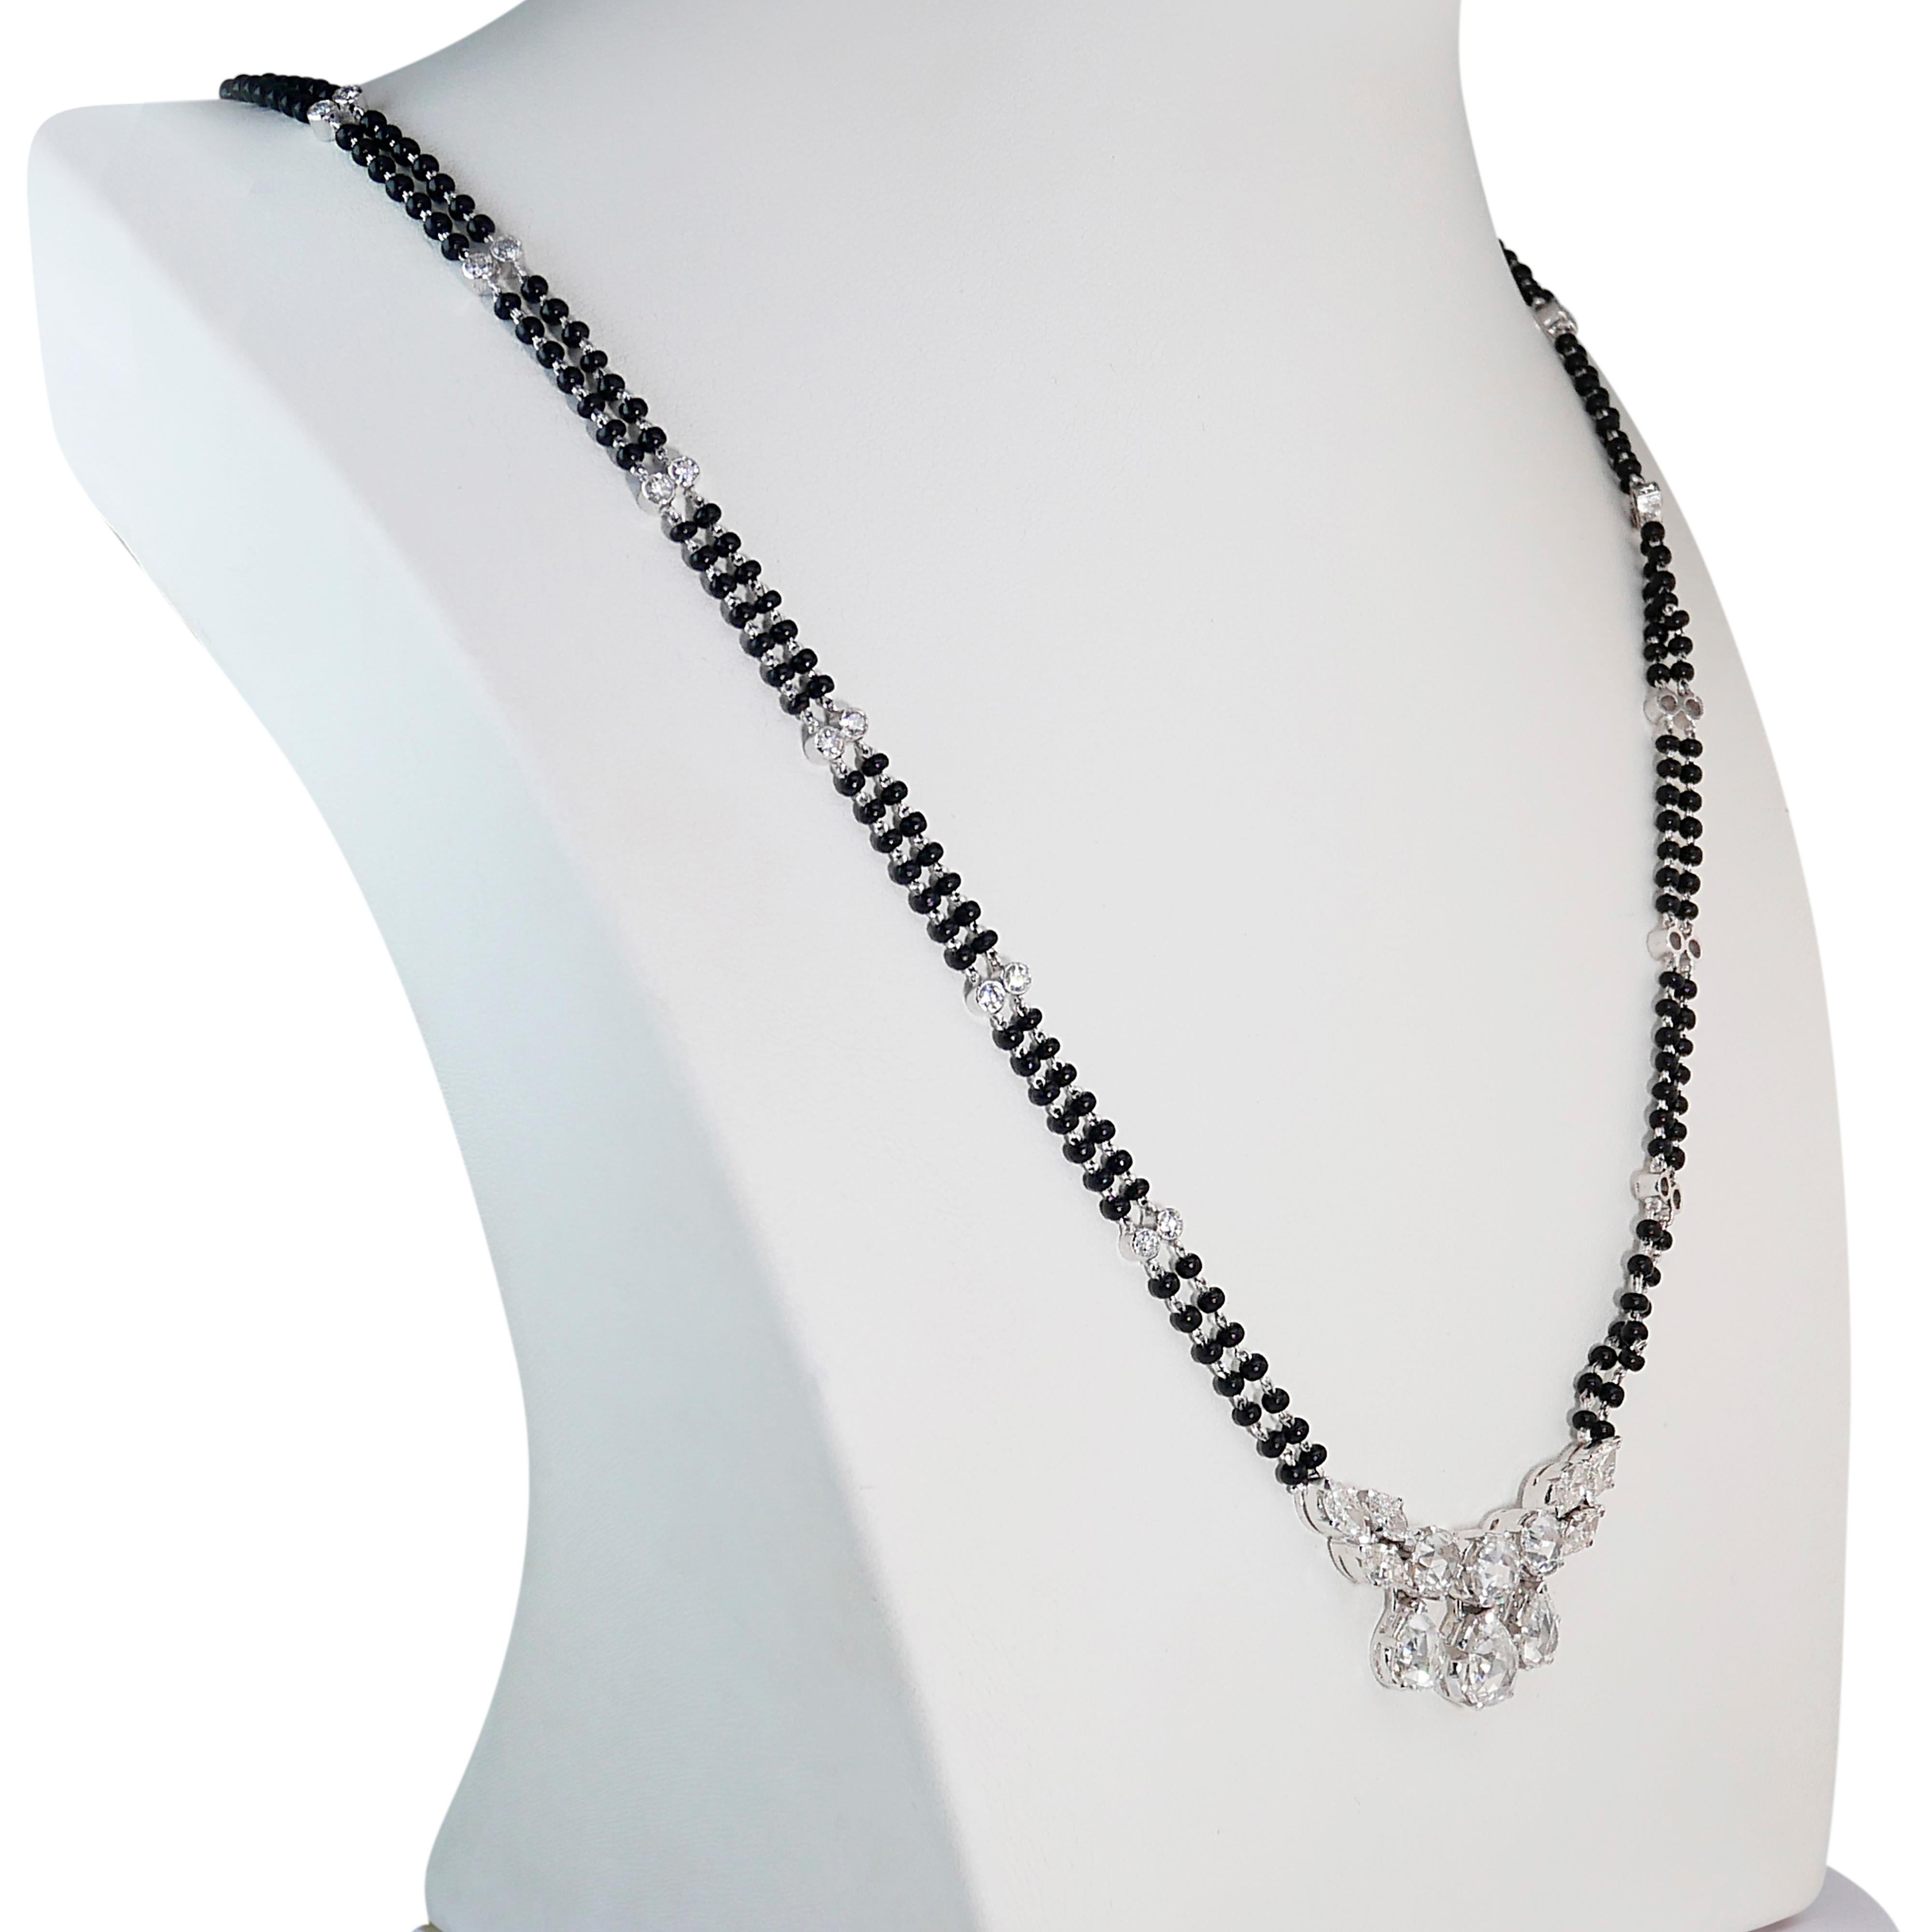 Glamorous 8.02 ct Onyx and Diamond Necklace in 18k White Gold - IGI Certified For Sale 3